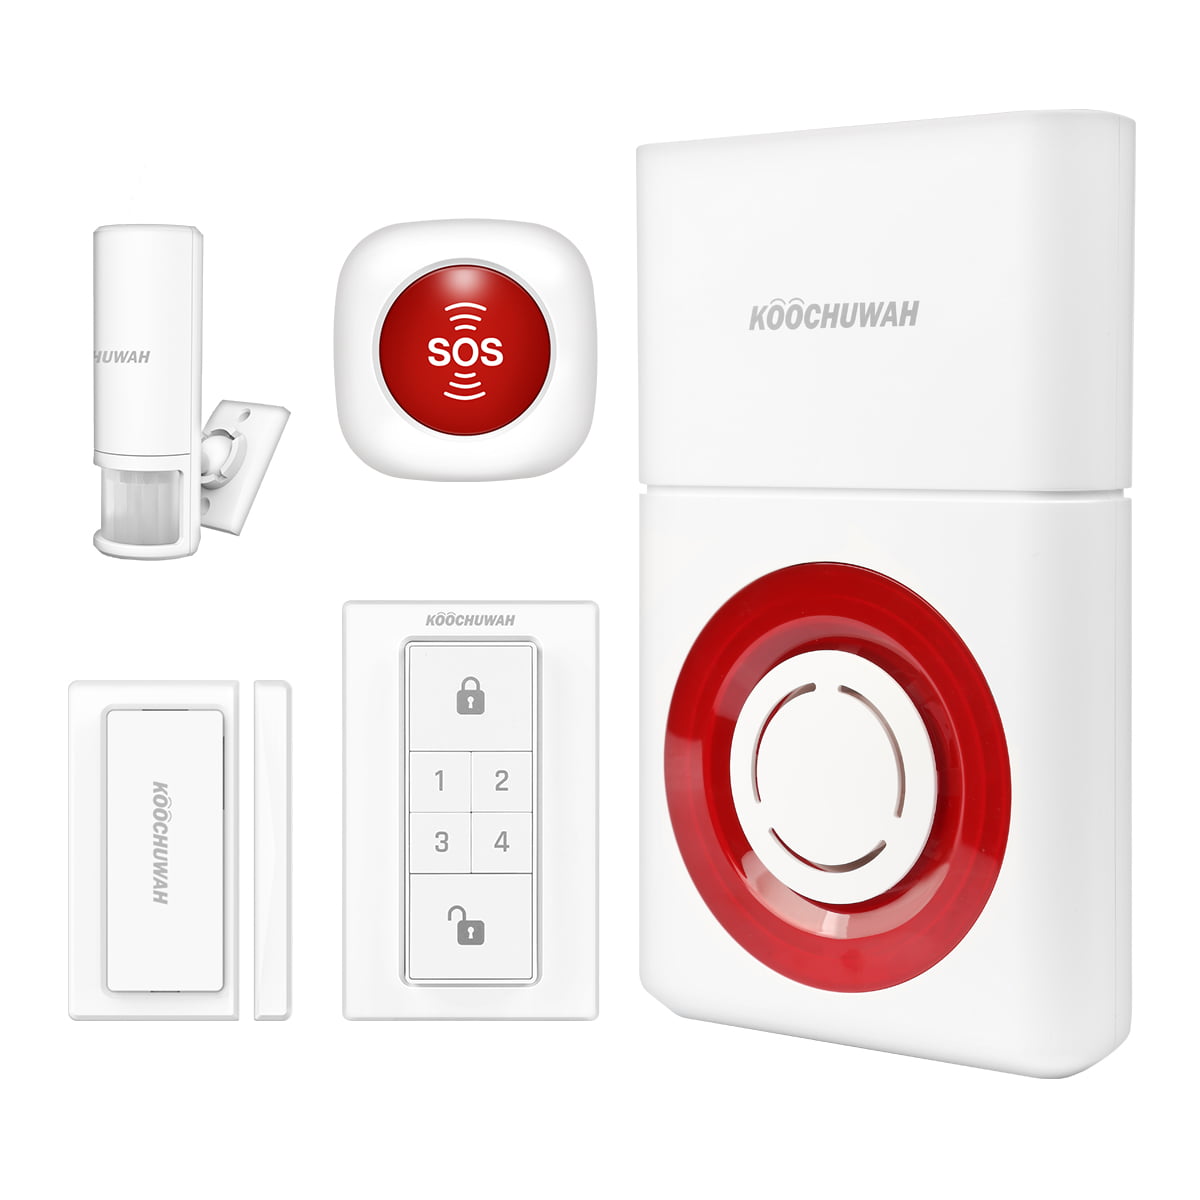 Details about   Wireless 2G 3G SMS GSM Alarm System 8 Channel Home Security Door Window Sensor